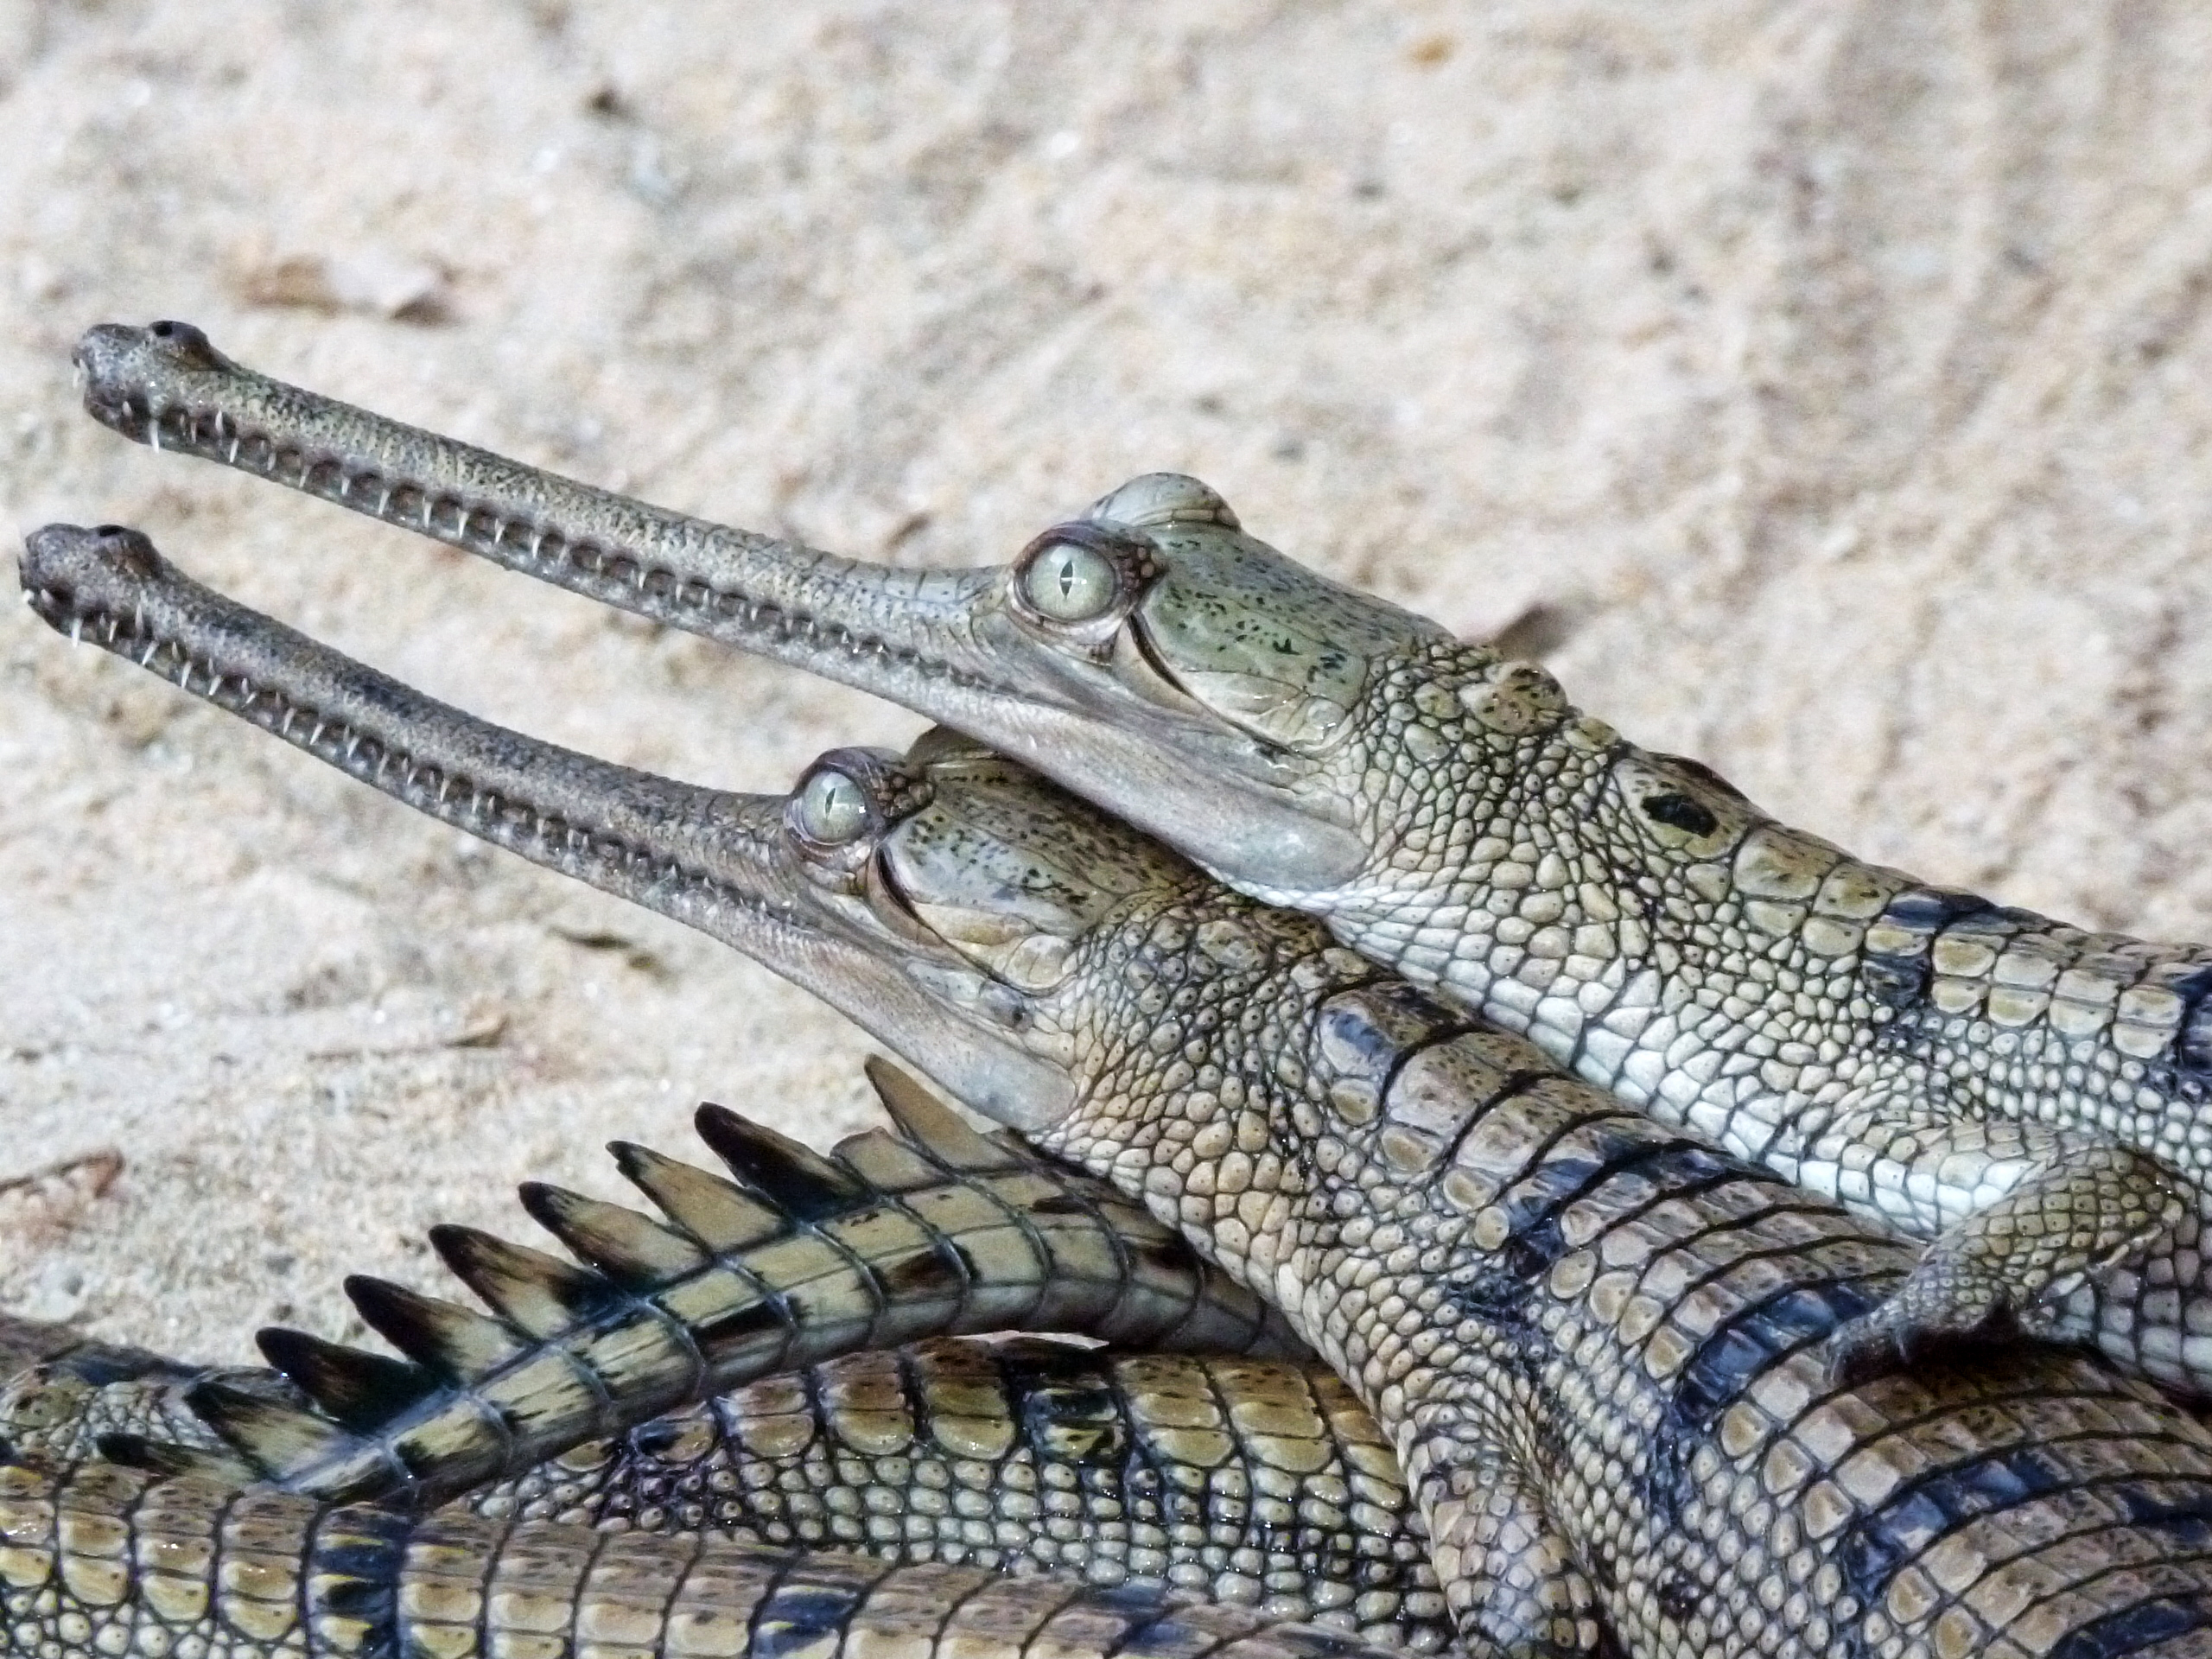 Gharial Day Care